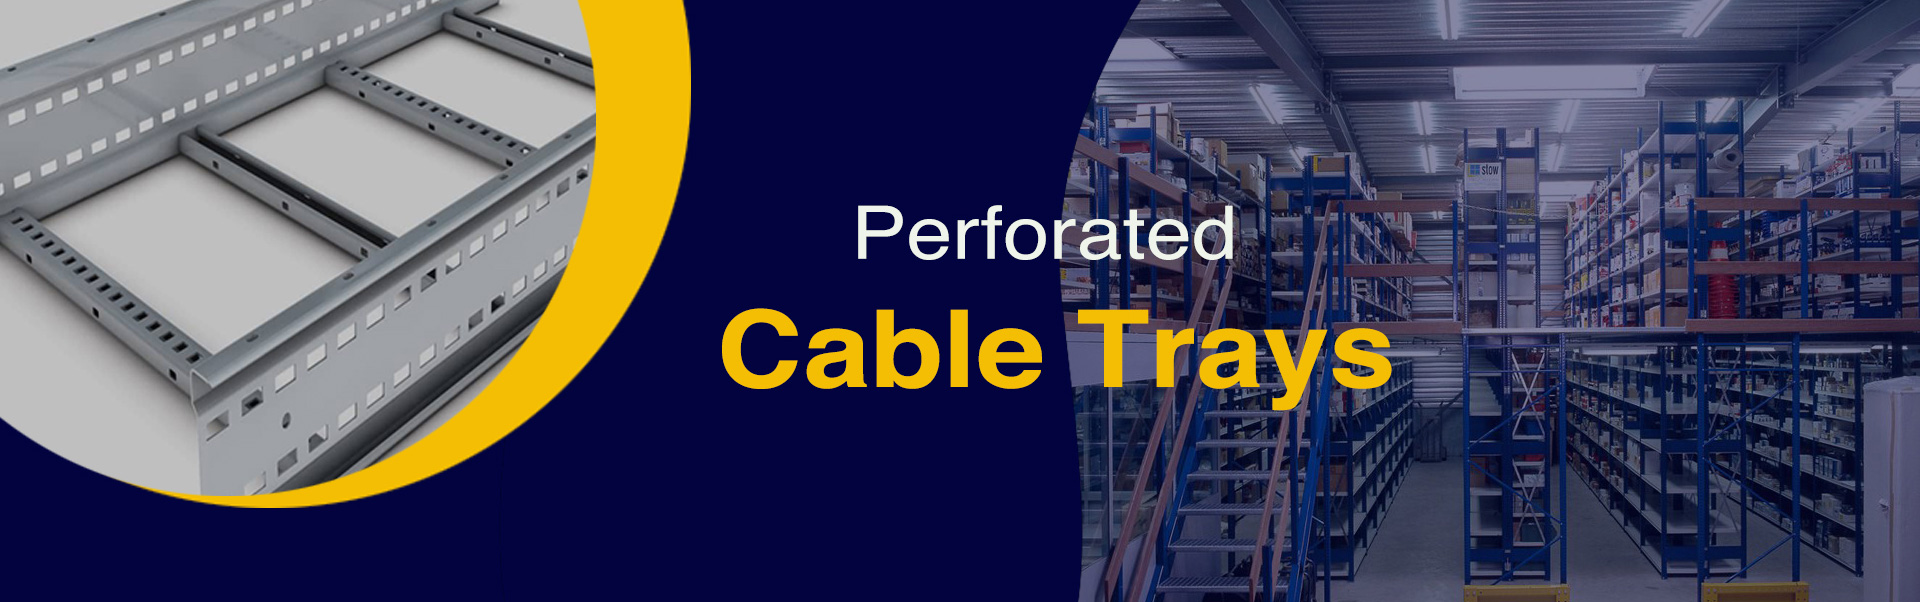 Perforated Cable Trays – How and Why?